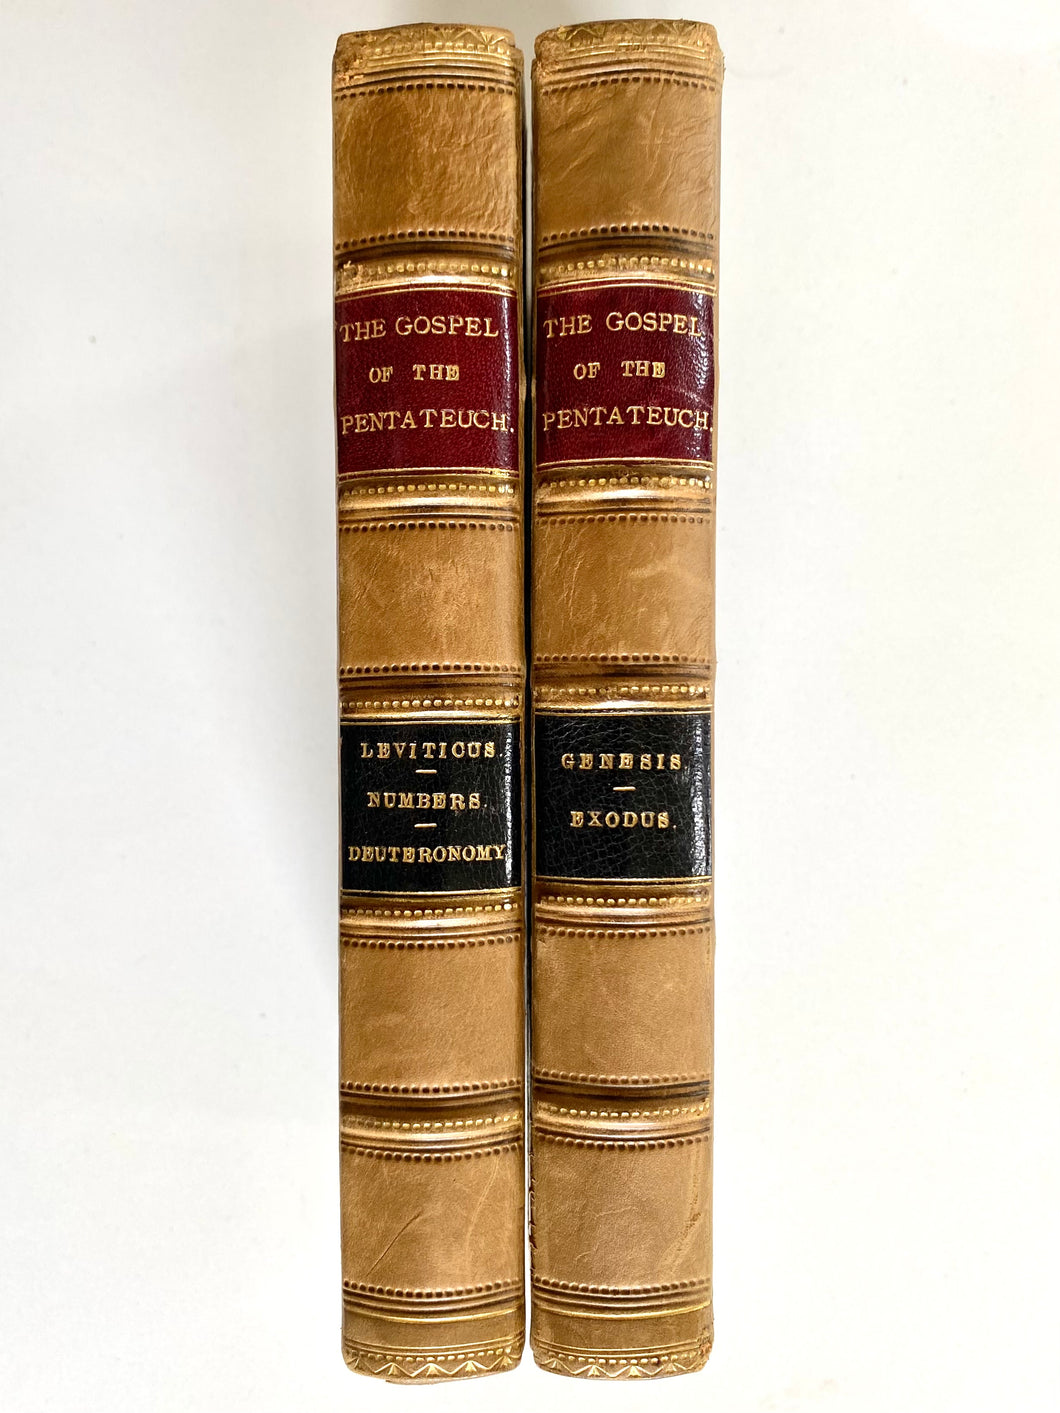 1863 HENRY LAW. Four Works in Two Leather Volumes. Spurgeon Recommended Commentaries!